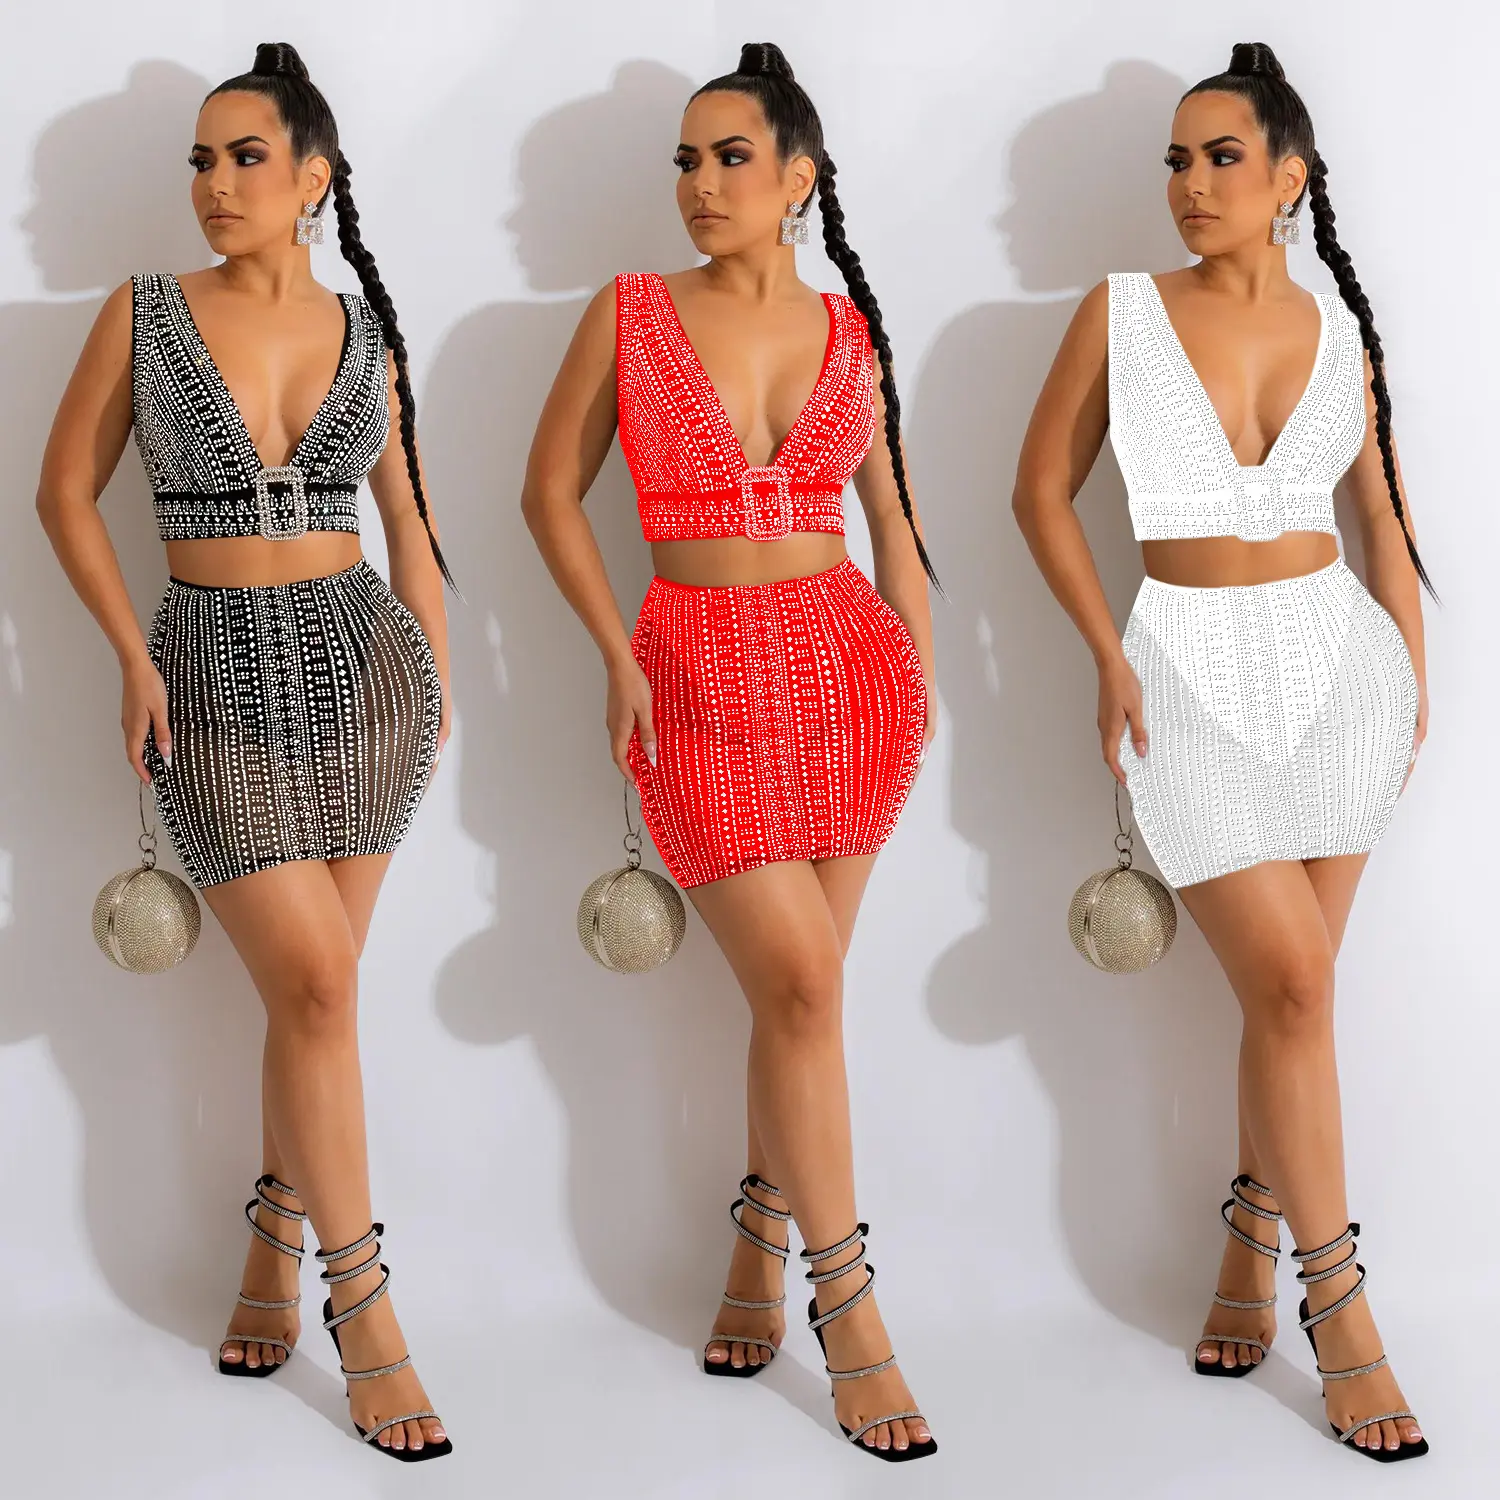 K1770 boutique sets rhinestone shinny v-neck backless sleeveless mesh crop top and mini skirt two piece set women clothing